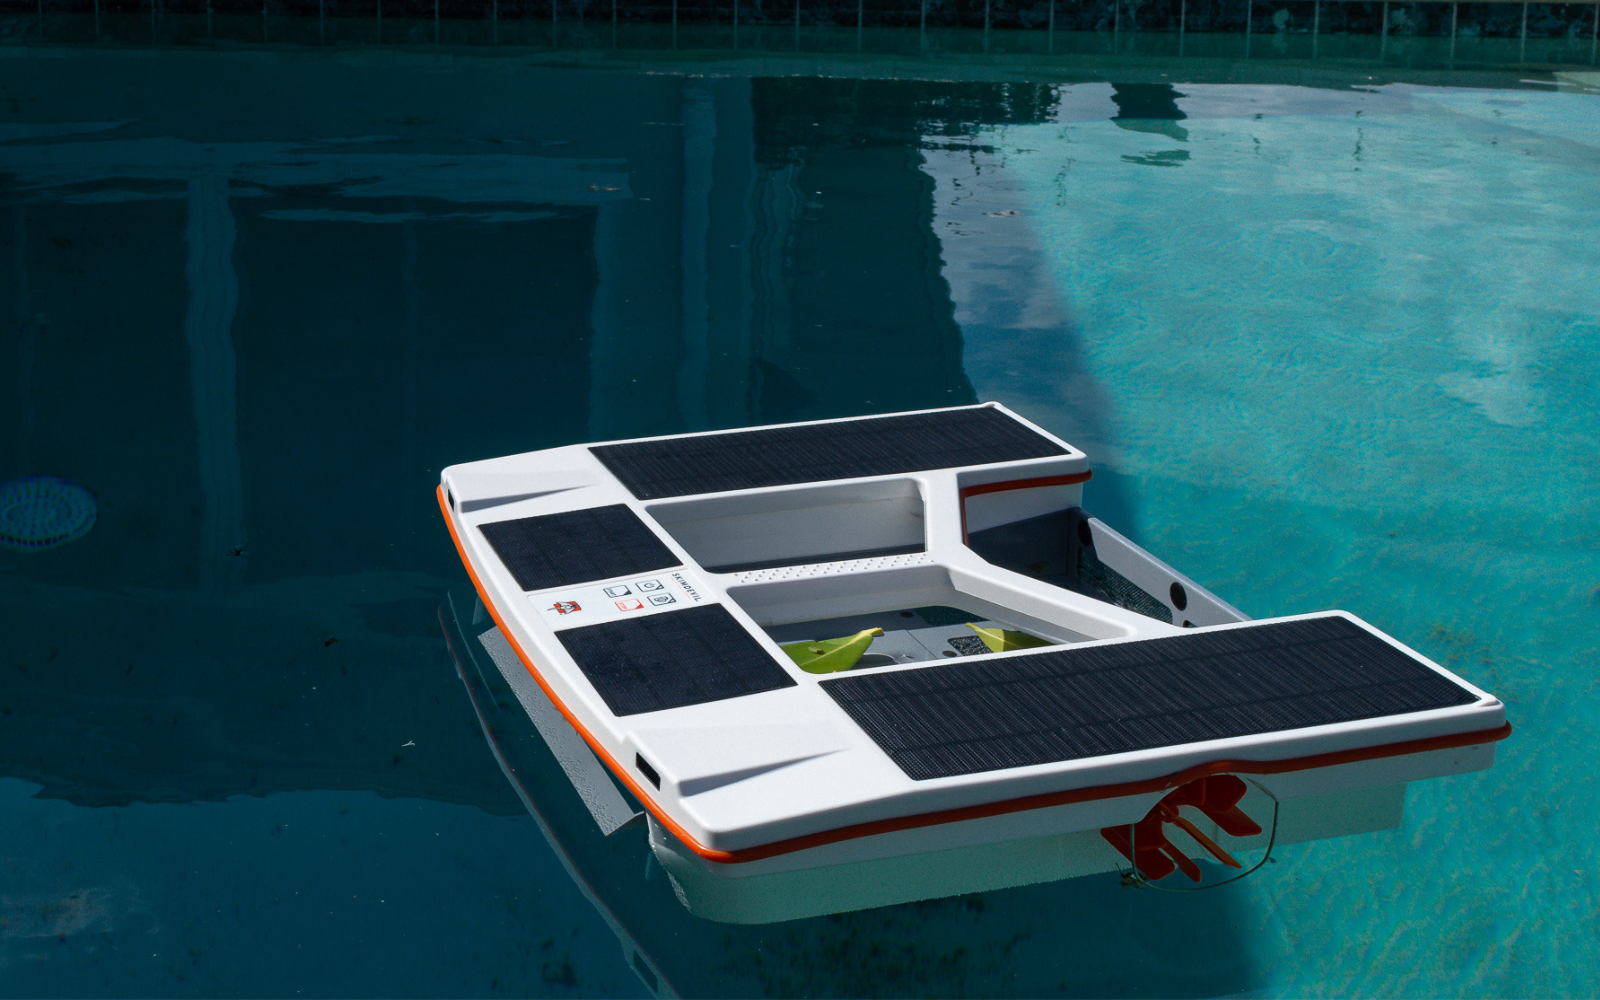 Looking for a pool skimmer? SkimDevil automatically cleans the surface of your pool